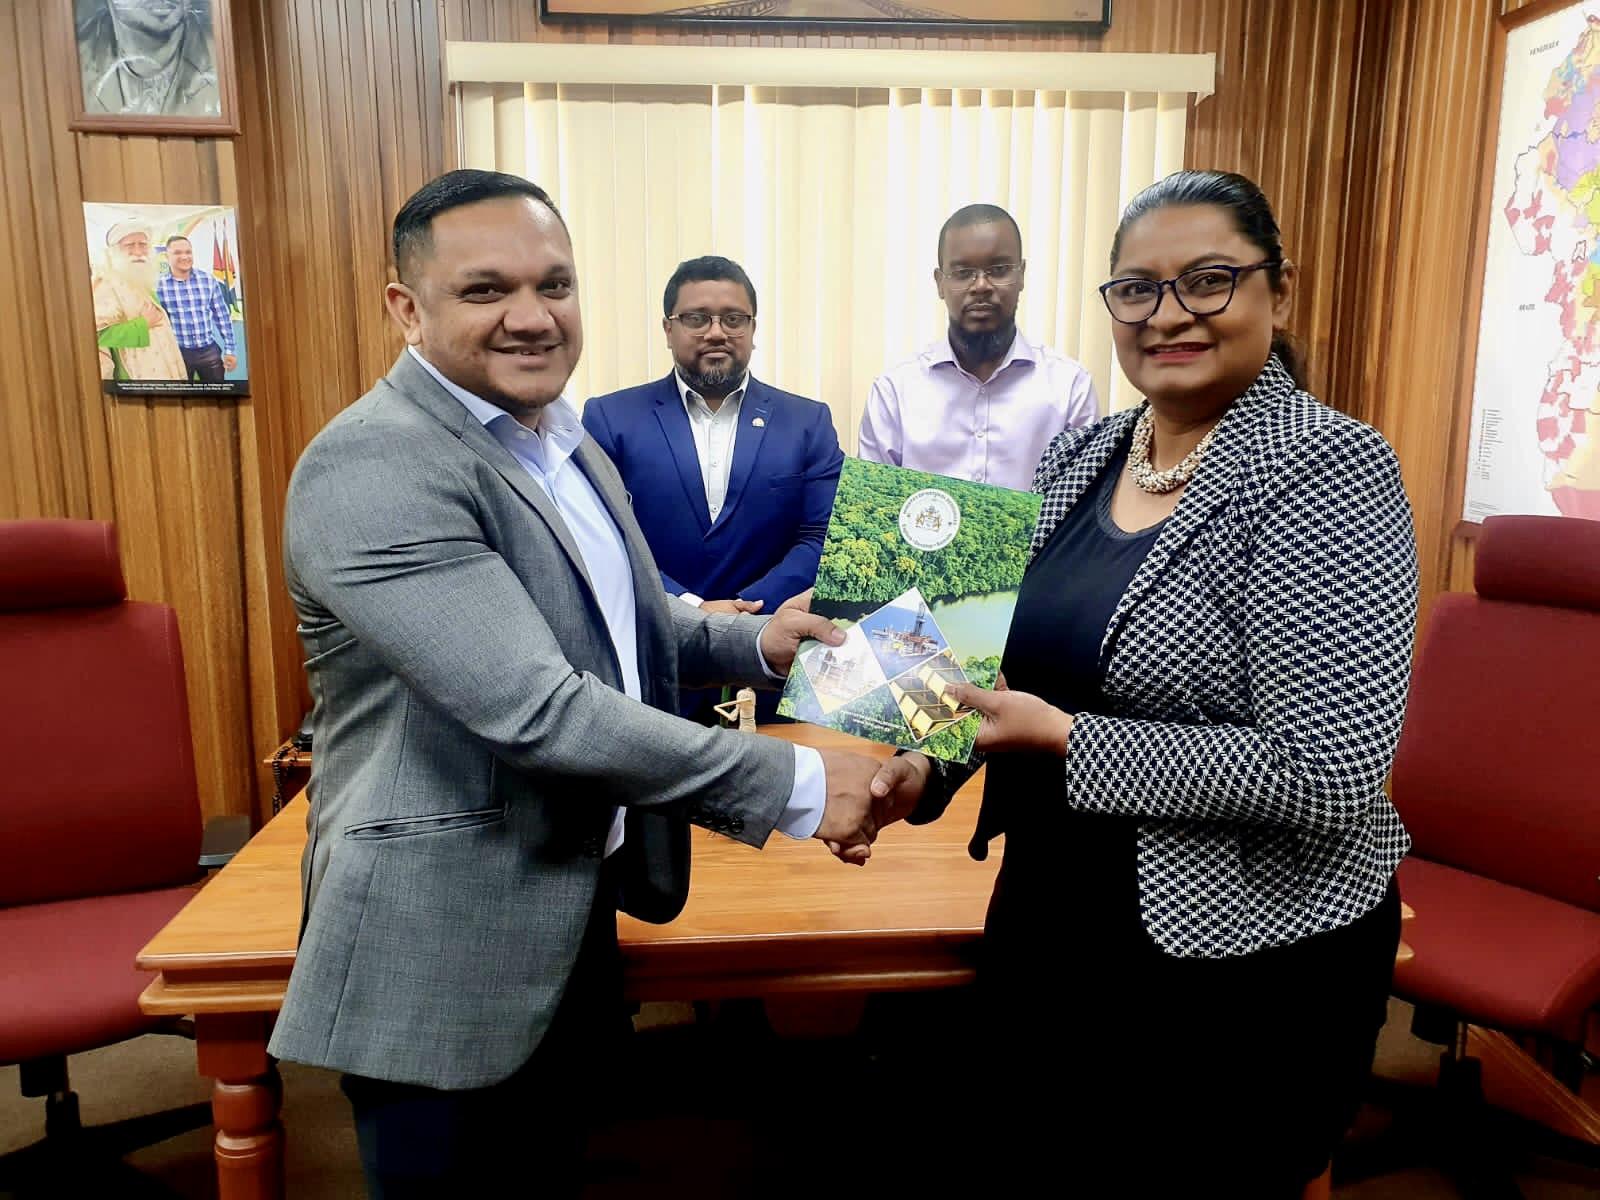 Minister of Natural Resources, Vickram Bharrat, MP., hands over the signed Letter of Approval to SLB’s Managing Director, Ms Sharlene Seegoolam. The men are joined in the background by the Director of the Local Content Secretariat, Dr Martin Pertab and the ministry’s Legal Officer, Mr Michael Munroe.